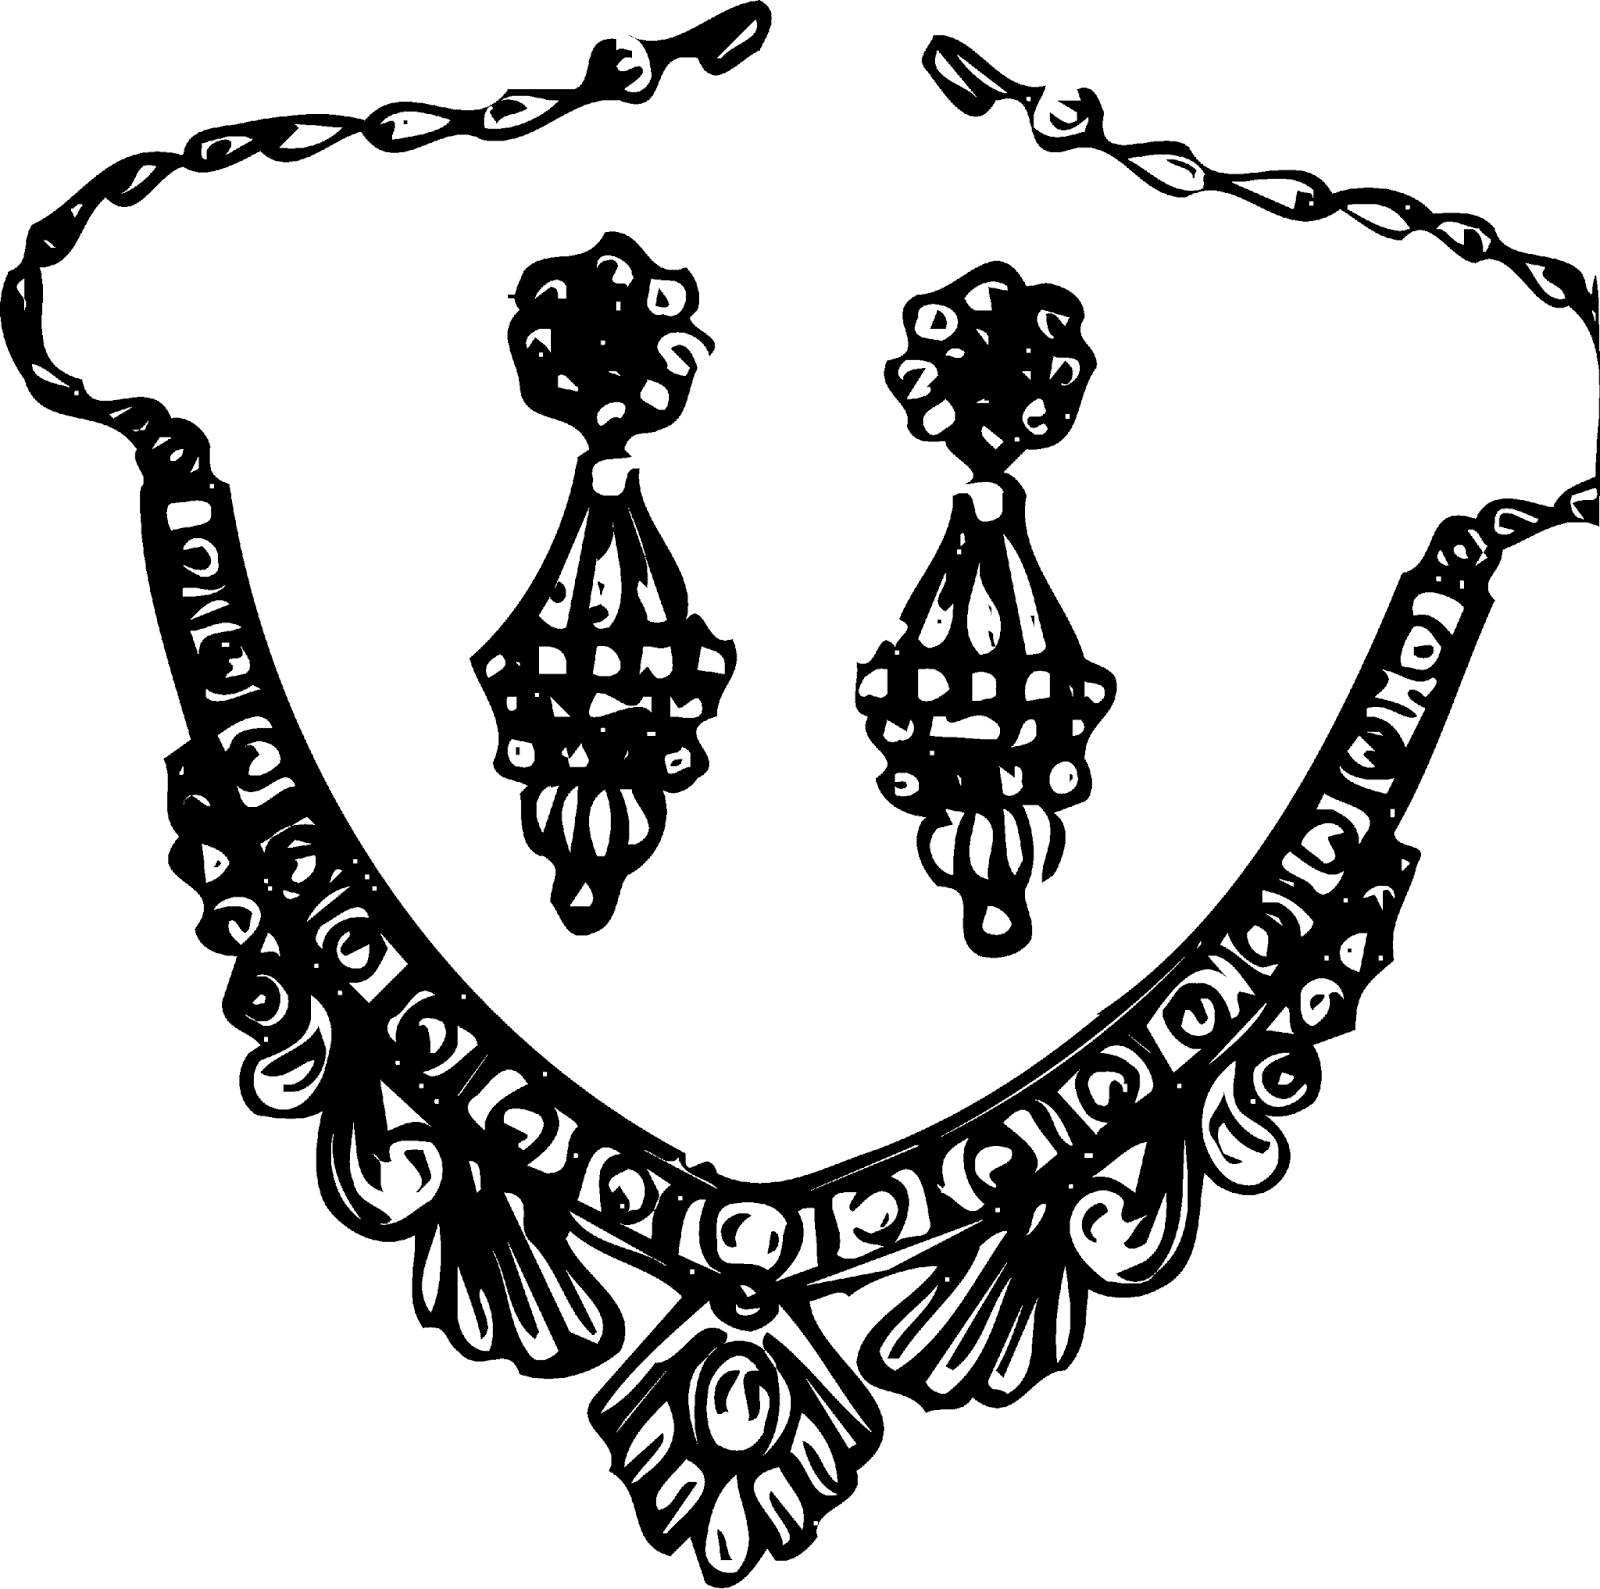 Jewelry clipart - ClipartFest